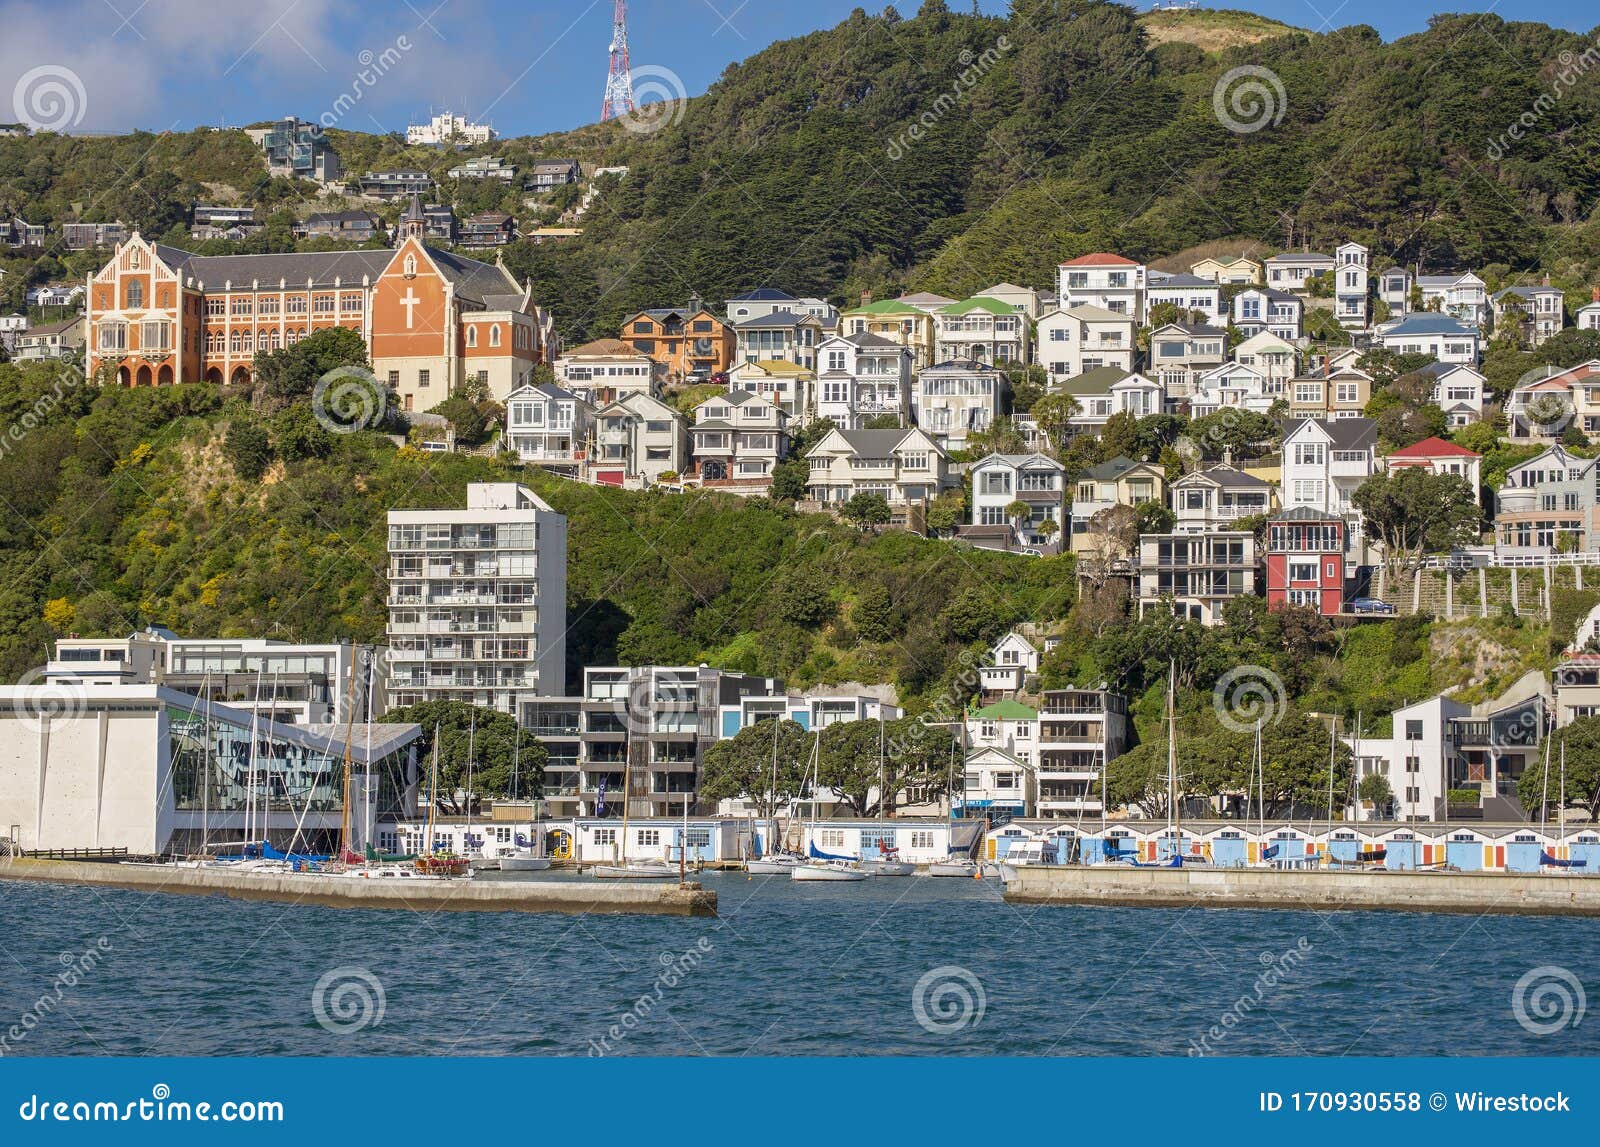 panoramic shot of expensive real estate on mt victoria and oriental bay in wellington, new zealand